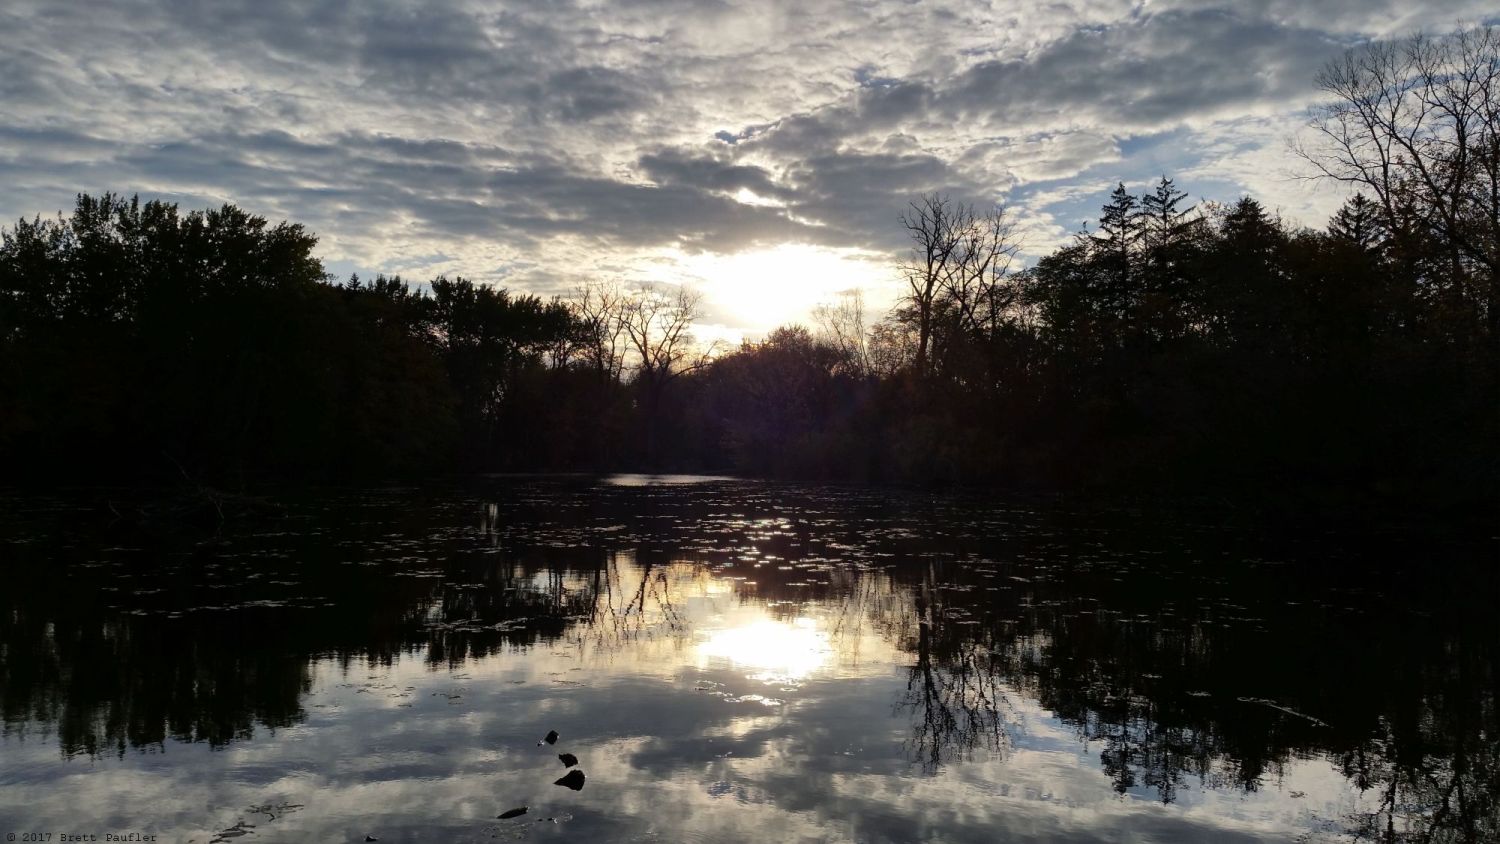 Low sun and clouds reflecting off of a pond in the middle of a forest, images have nothing to do with the text, and are taken from a walk in a forest preserve, this is a nice view, and so, starts the page off with a bang, also, this is a backwards retrospective, and makes sense in a certain way